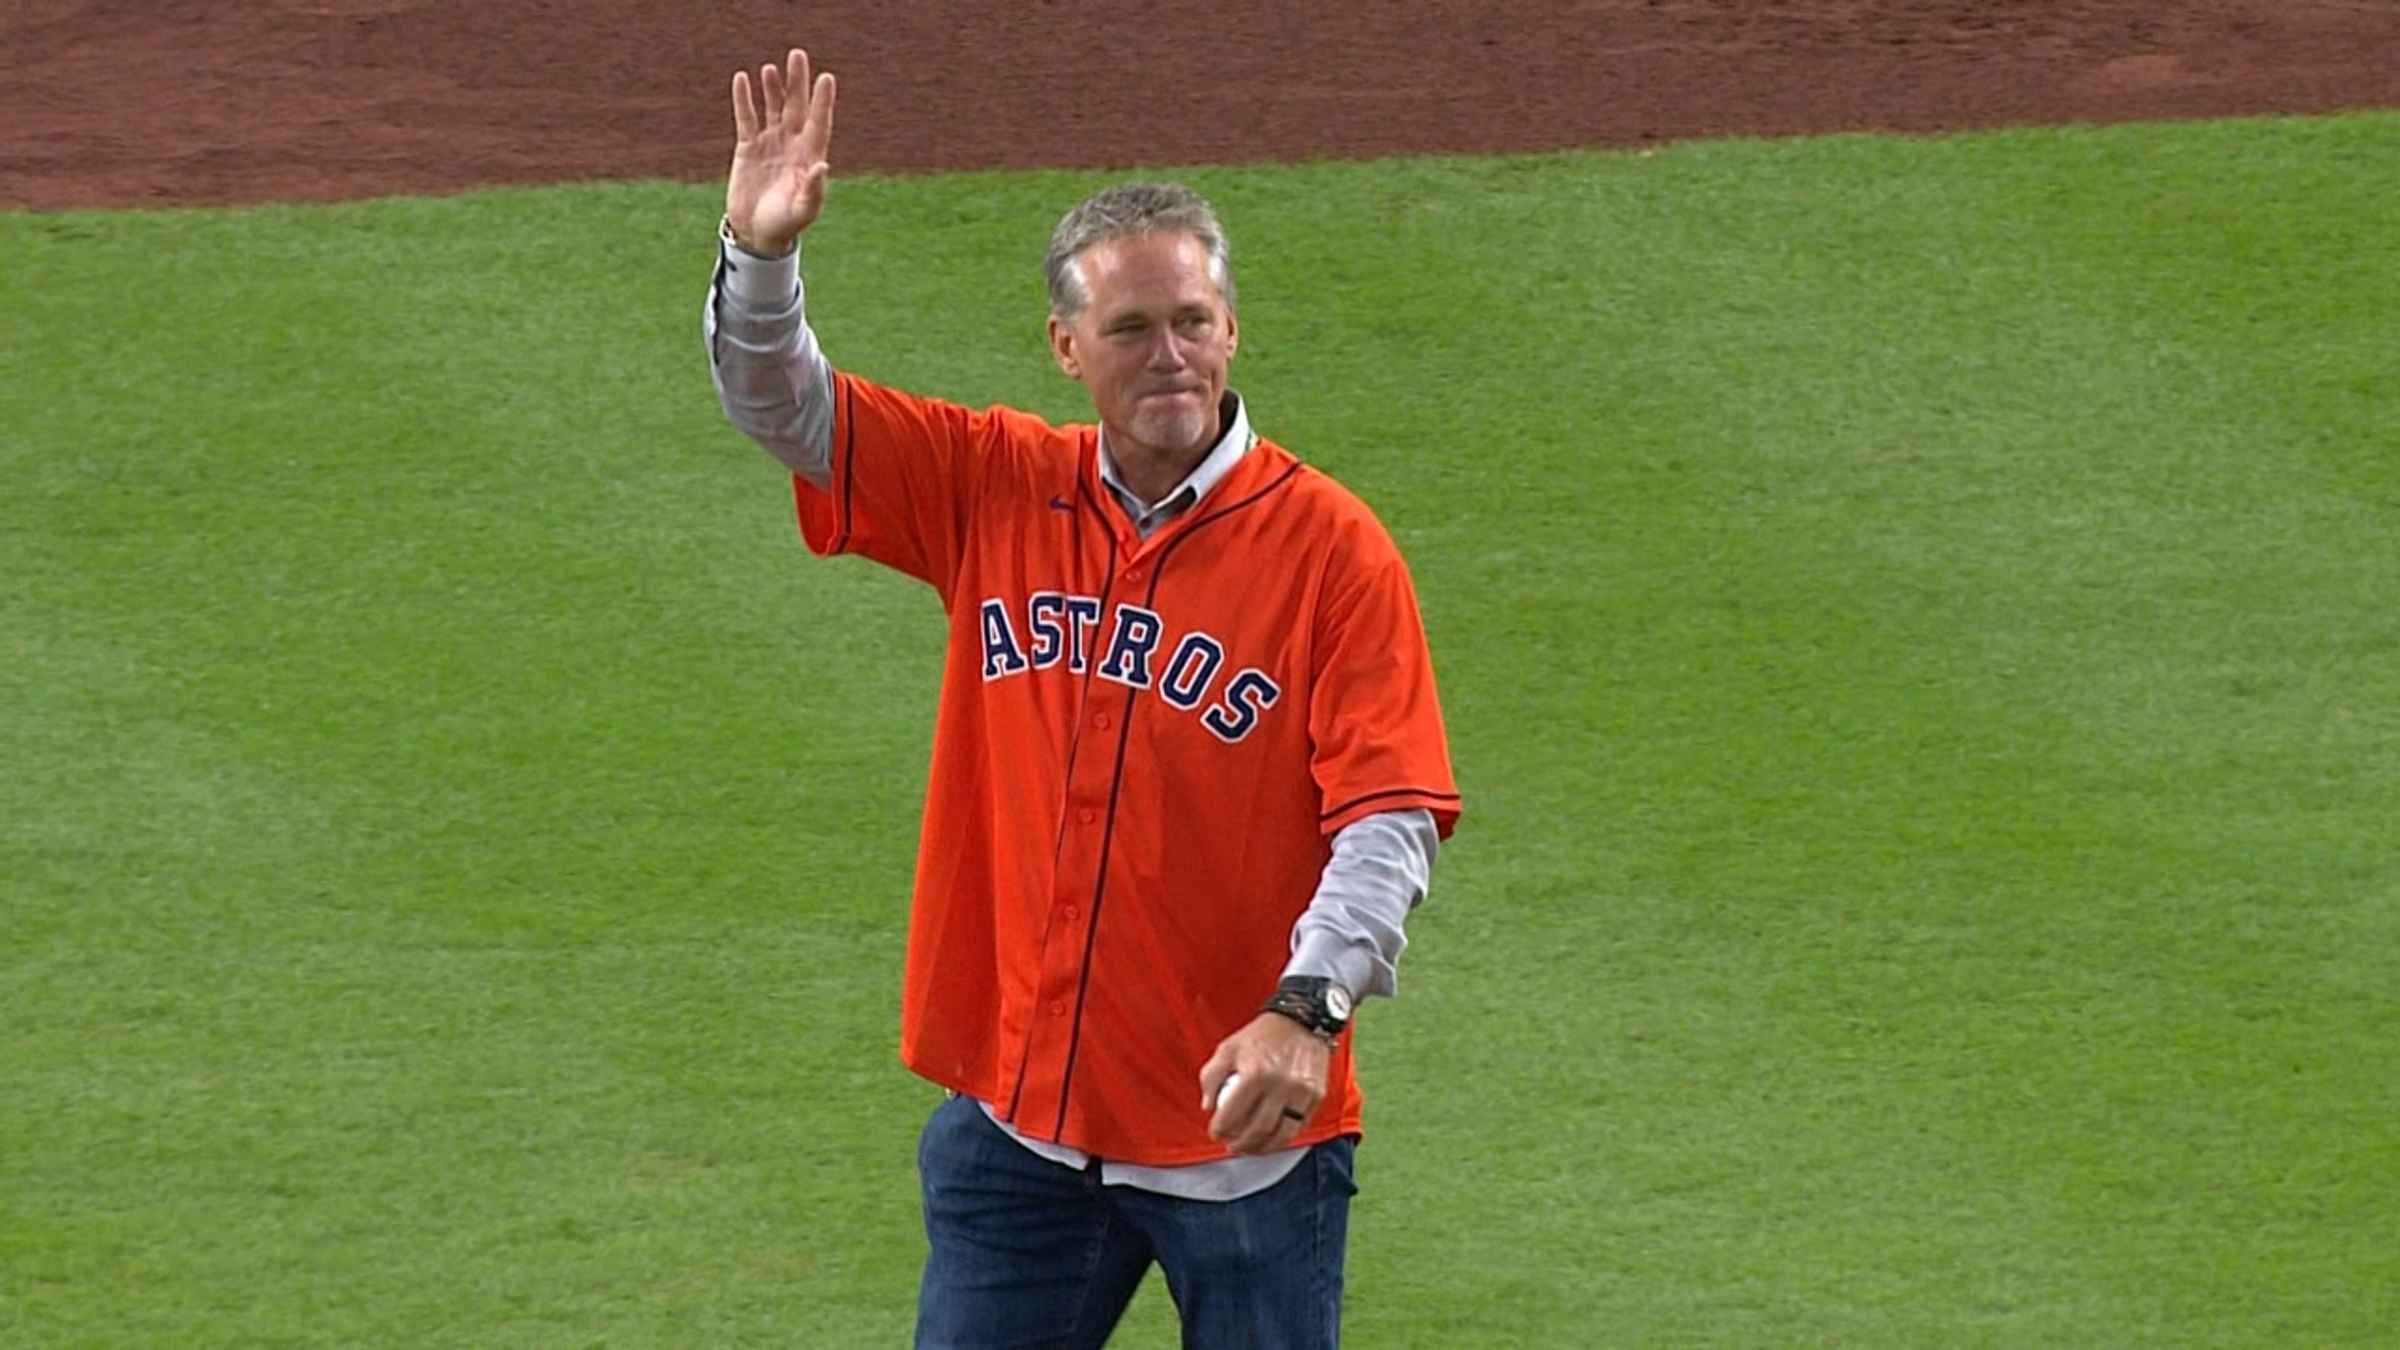 Craig Biggio is the Easy Pick for TCB's March Madness - The